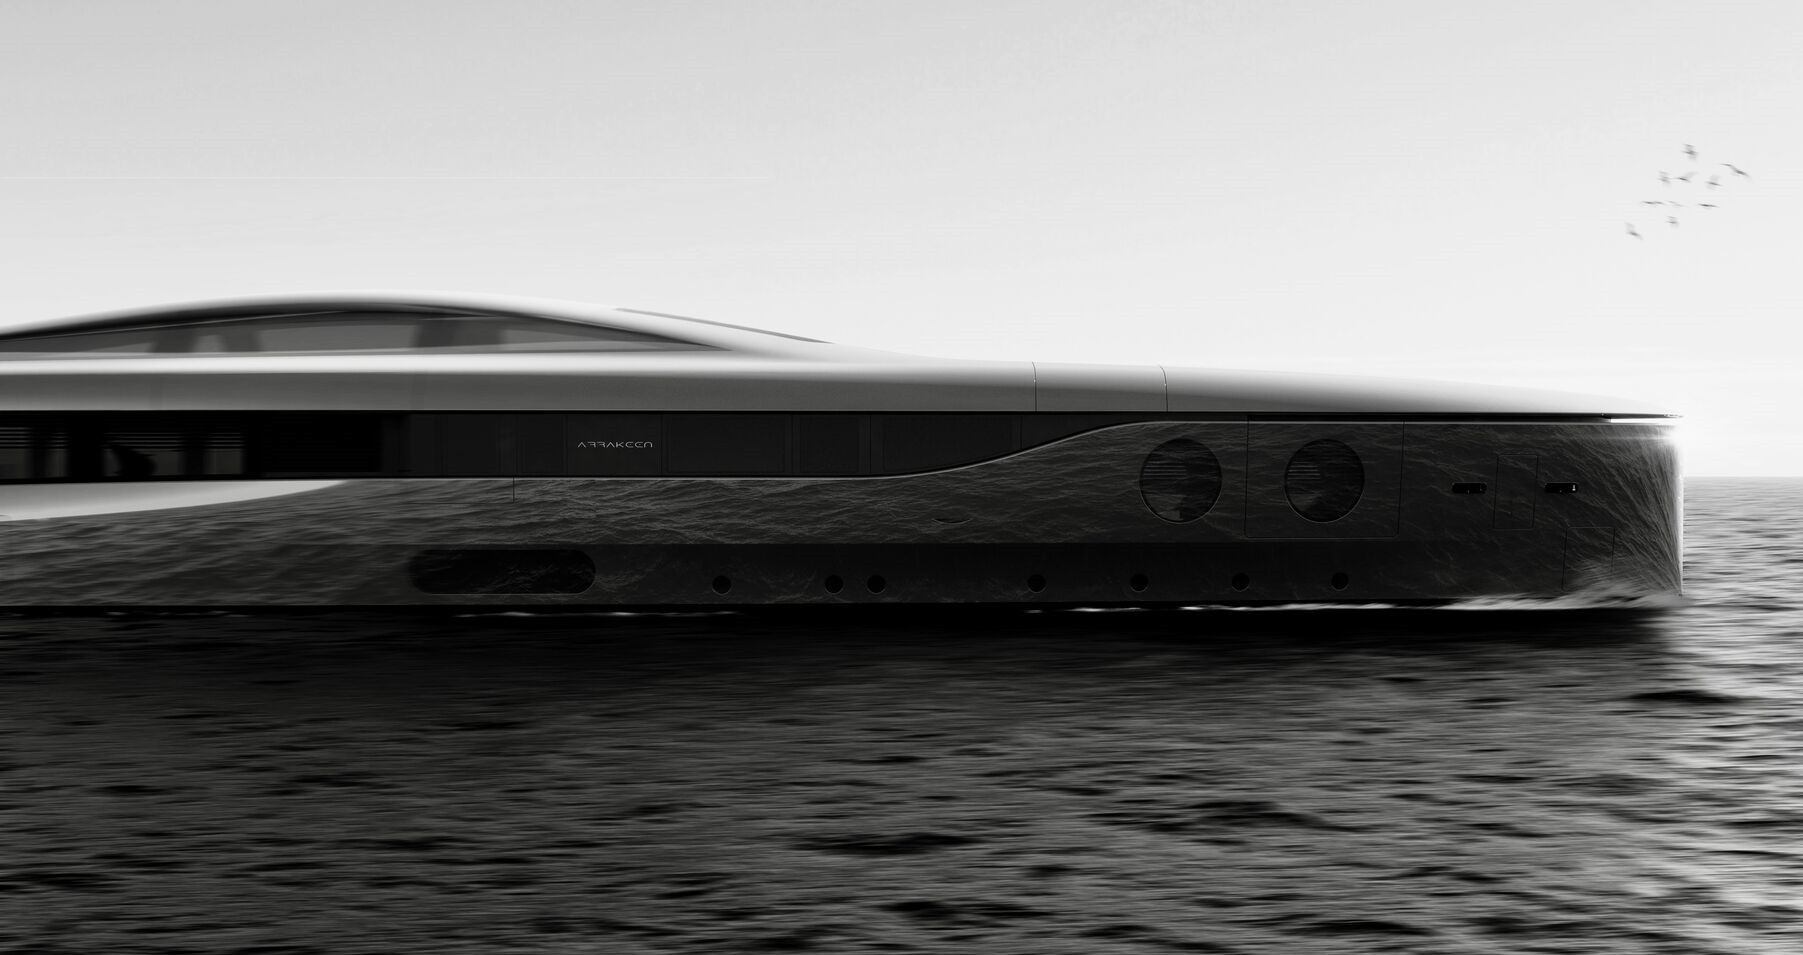 arrakeen is a retrofuturistic superyacht concept with gullwing doors and large portholes 4